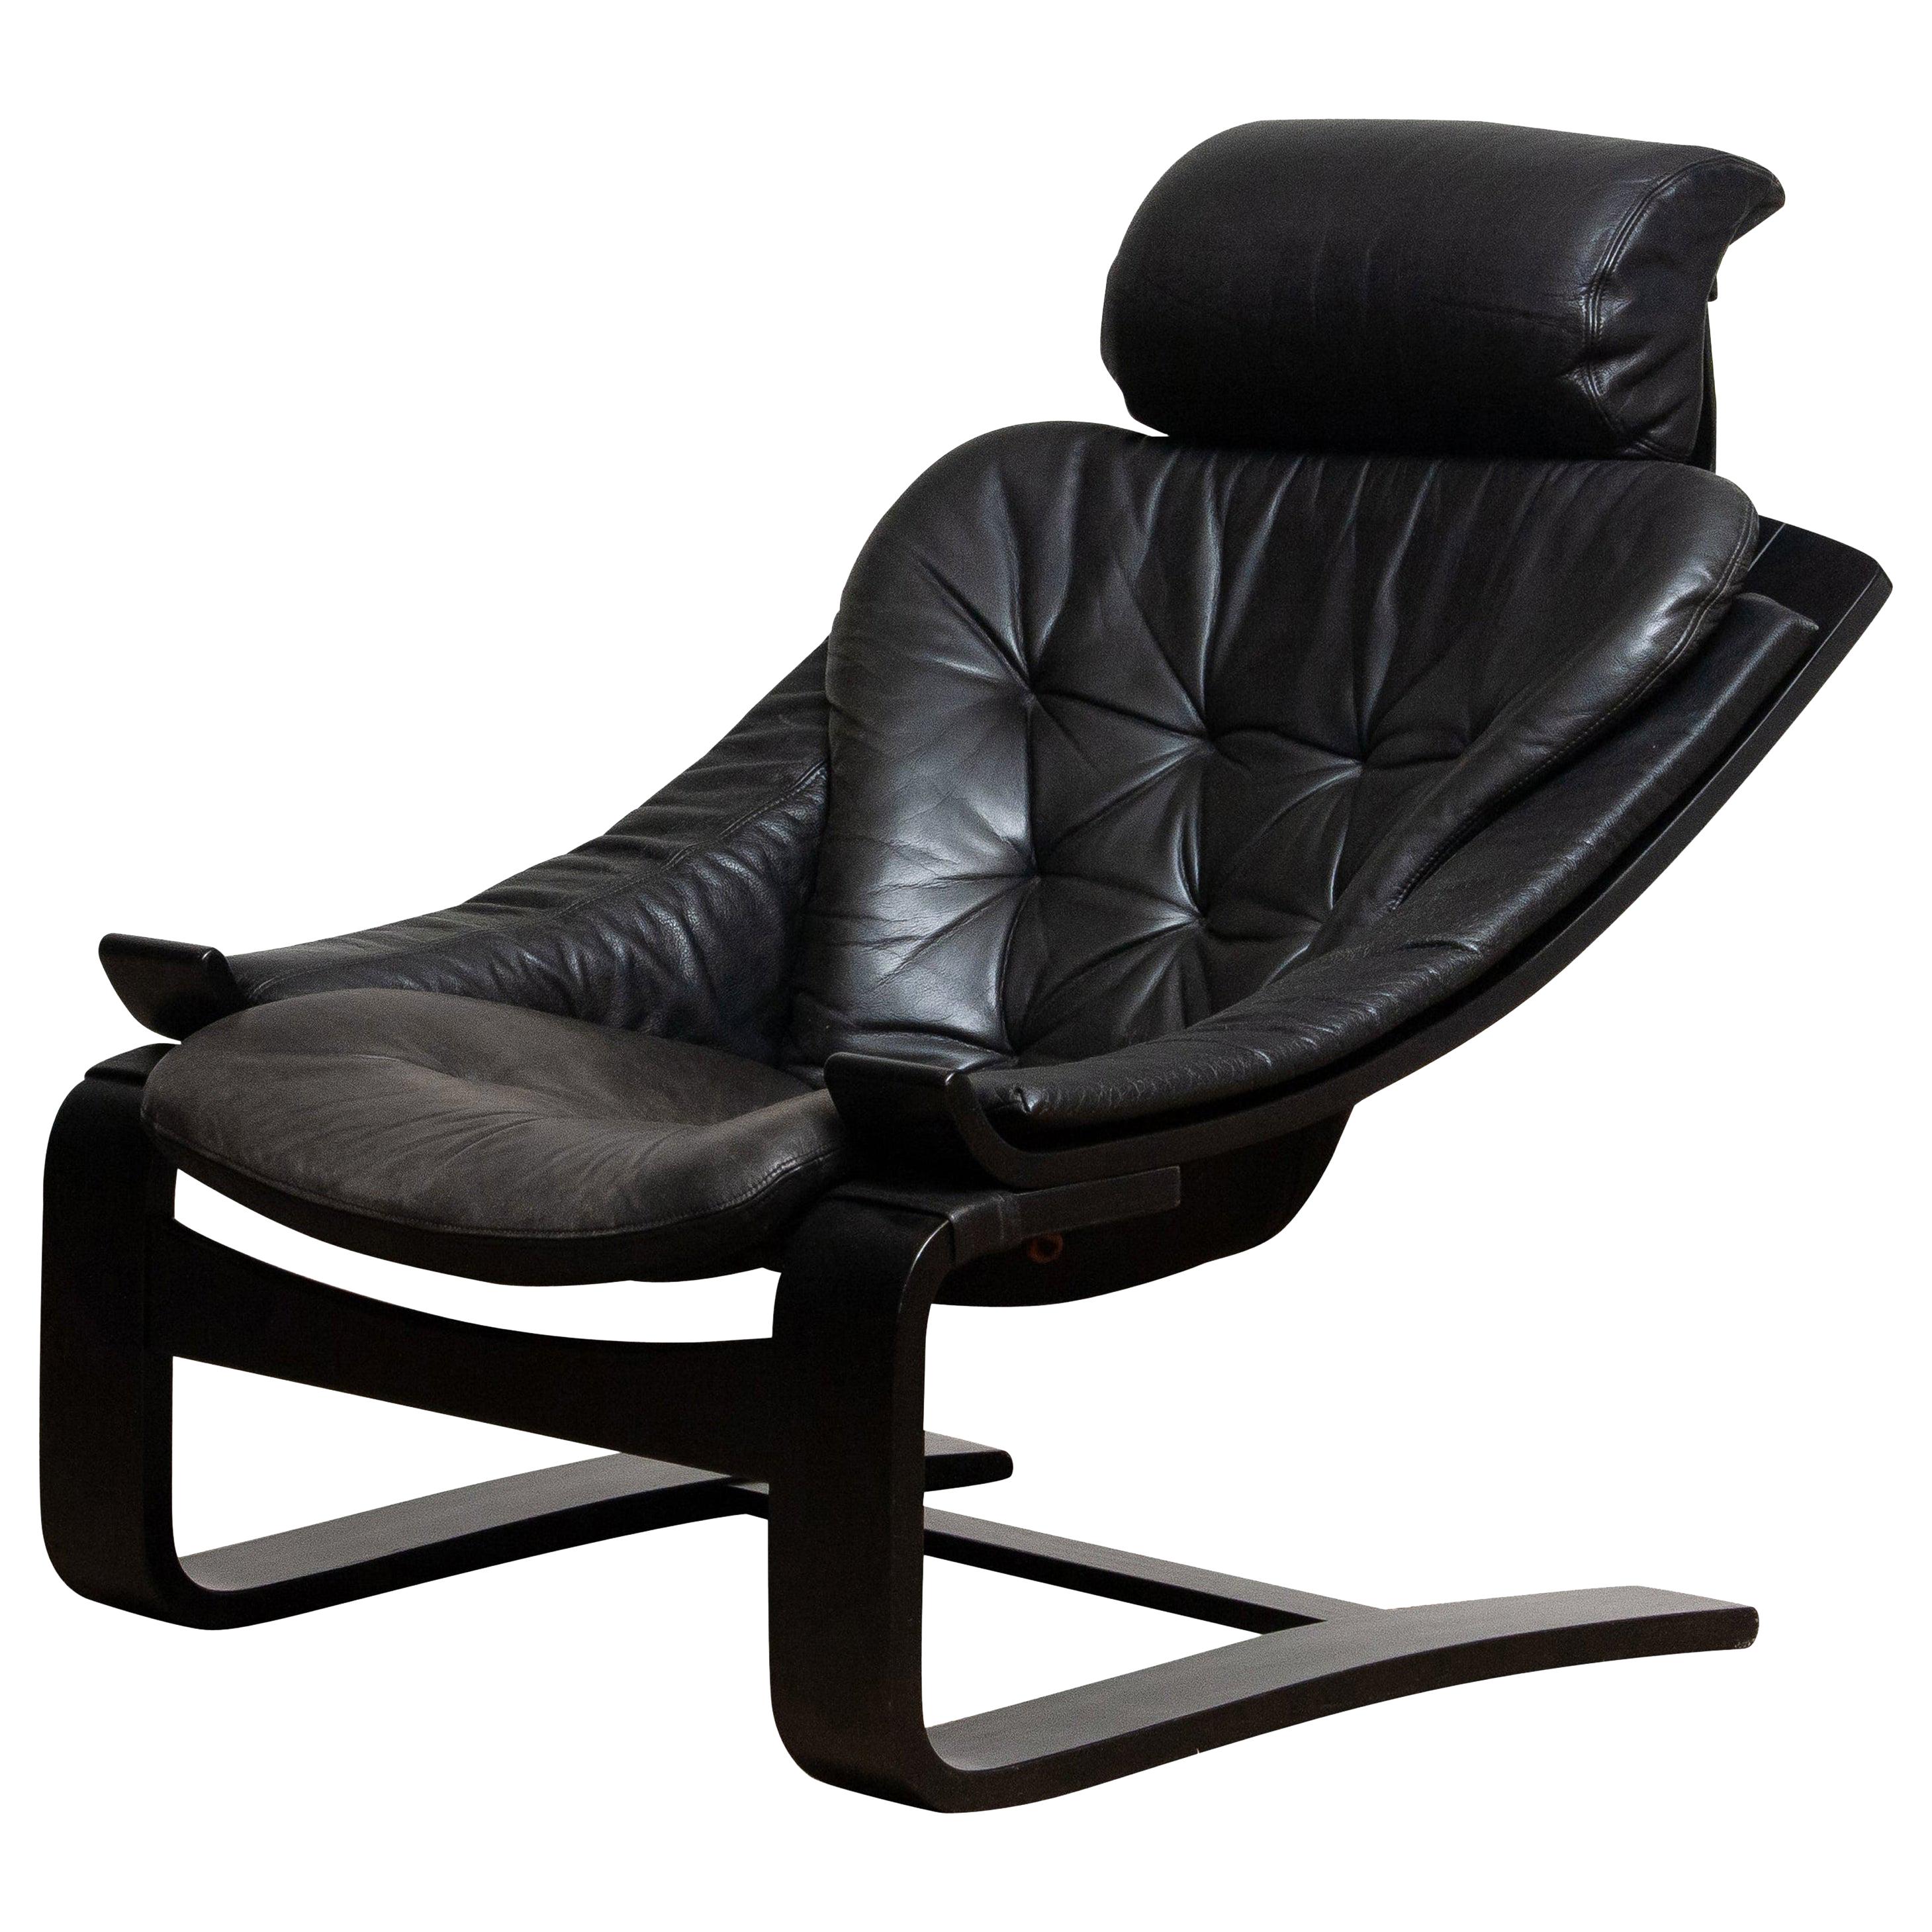 Extremely comfortable lounge / easy chair, model 